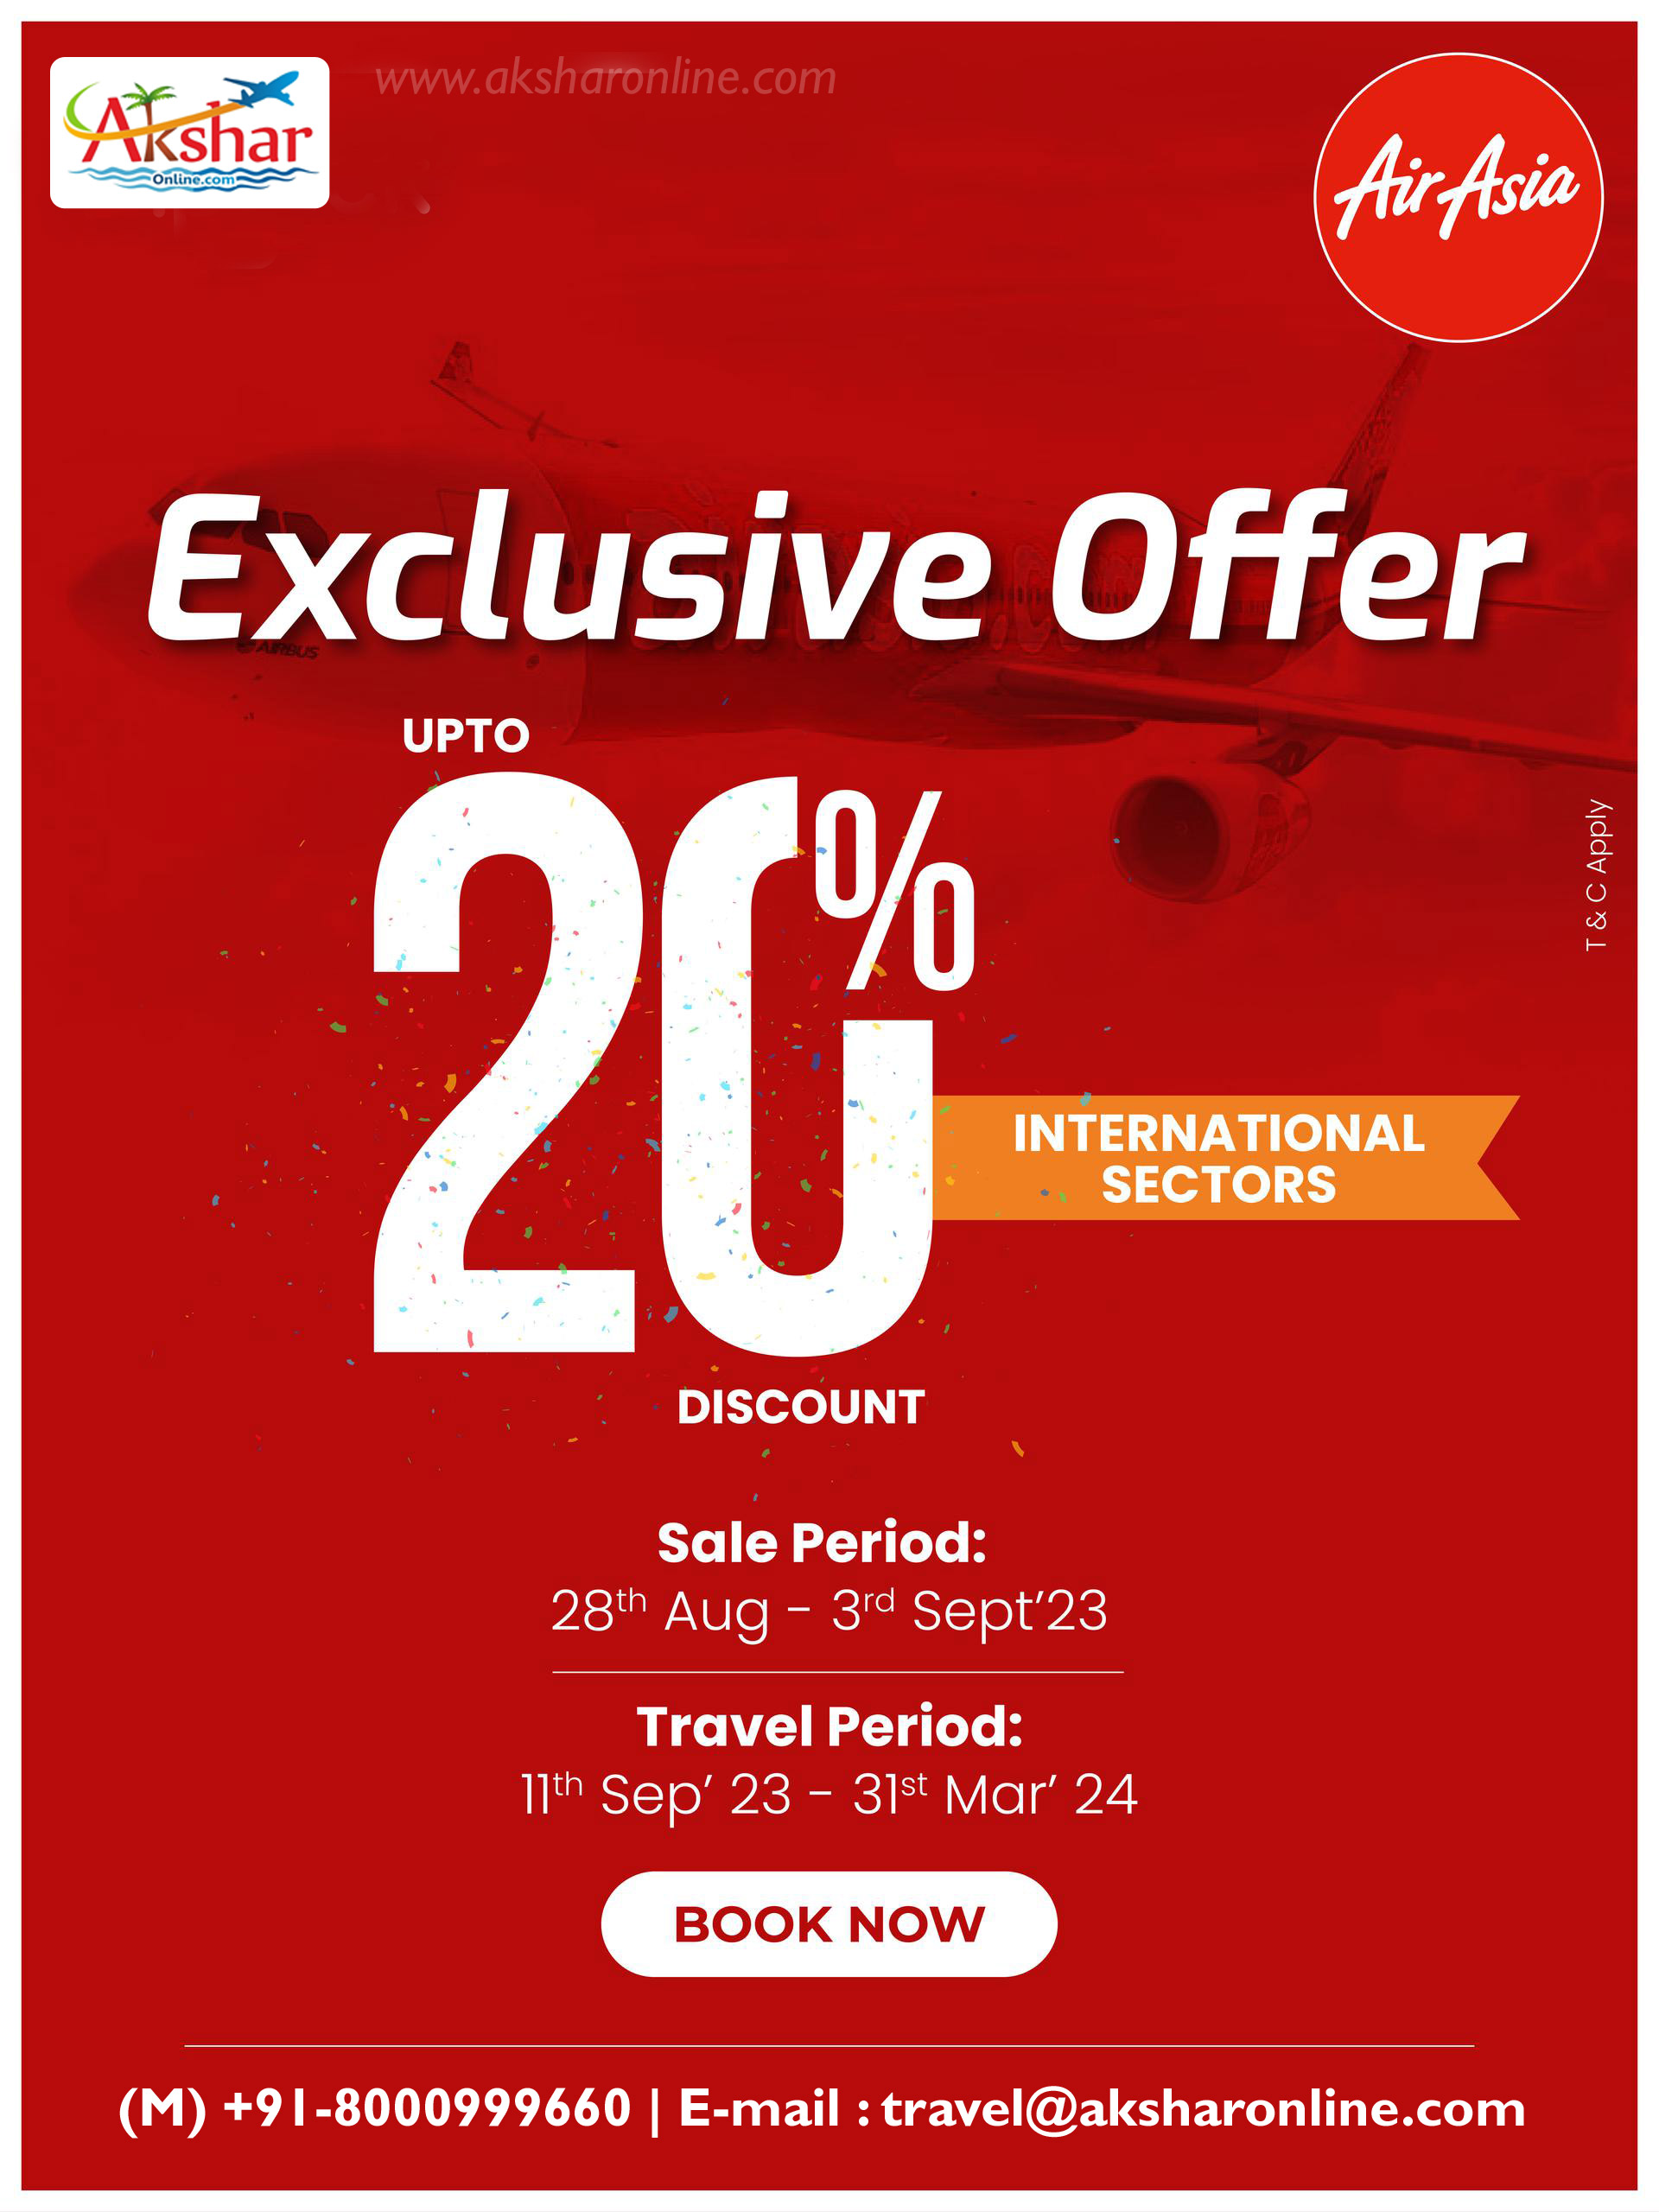 Exlclusive offer - AirAsia Airline - 20% Off - Limited Perior Offer - For booking call us on +91-8000999660 E-mail : travel@aksharonline.com, Airasia airline, airline ticket booking agent, ahmedabad airticket booking agent, hotel booking, tour packages, wire transfer services, forex card and more... vishwas city part-1, r.c.technical road, ghatlodia, ahmedabad - 380061. mitesh patel